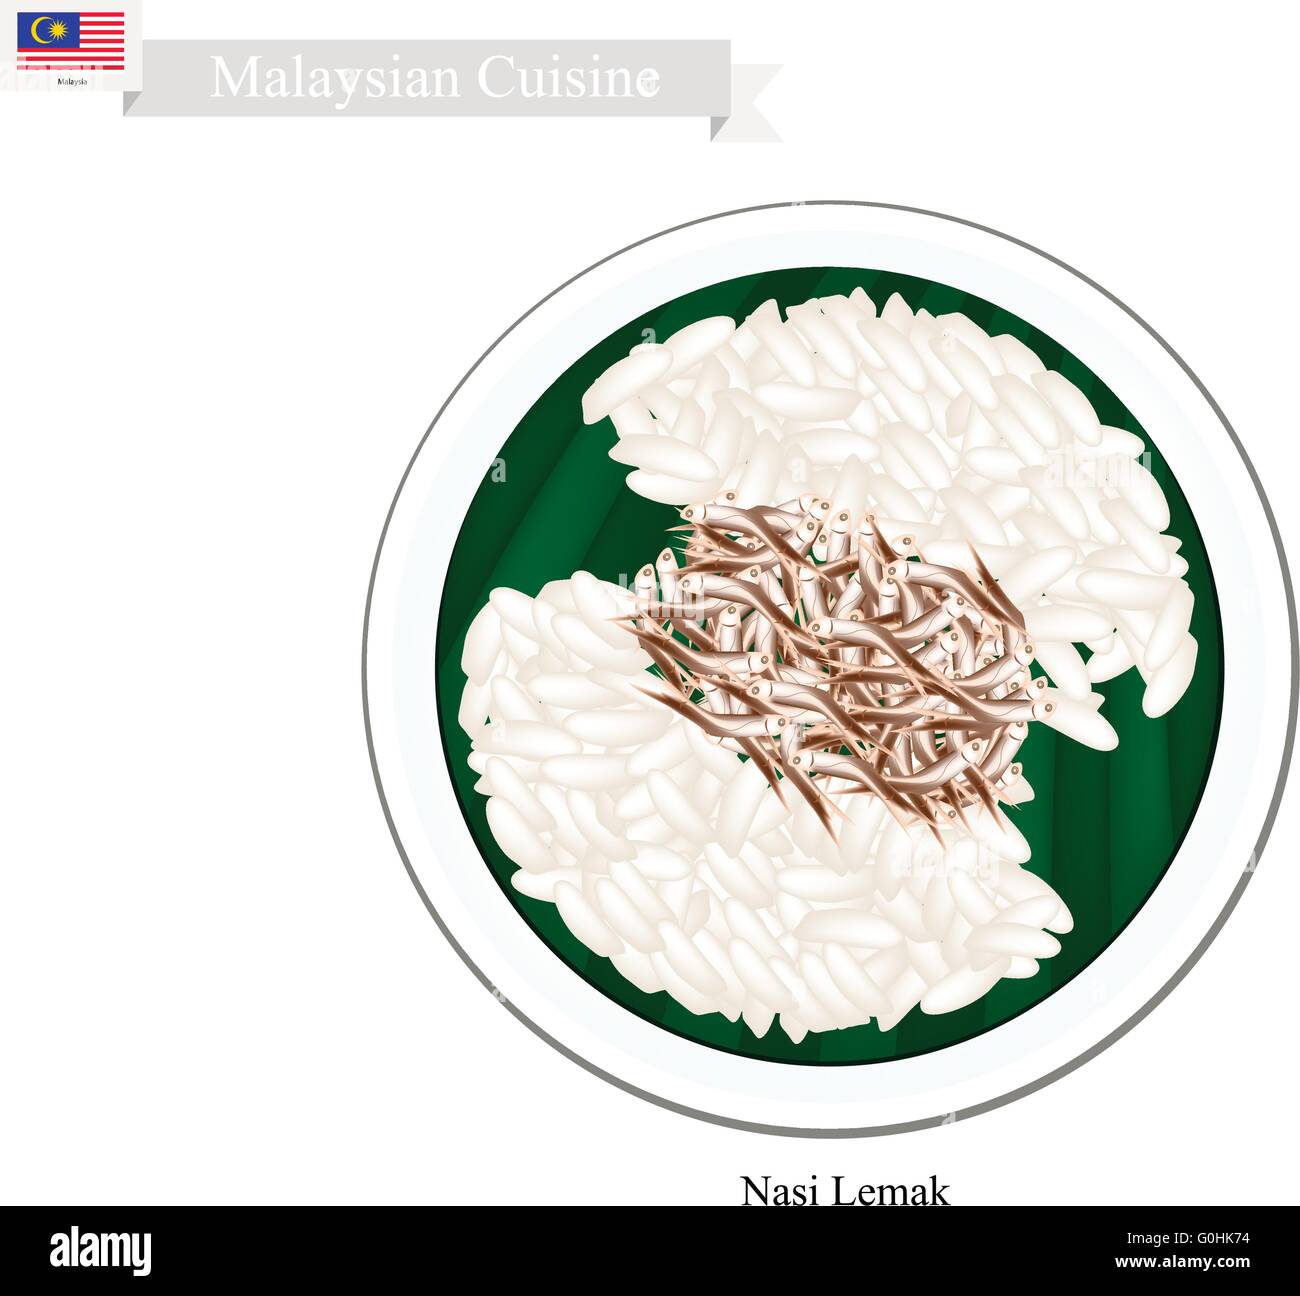 Malaysian Cuisine, Nasi Lemak or Steamed Rice Cooked in Coconut Milk Served with Anchovies, The National Dish of Malaysia. Stock Vector